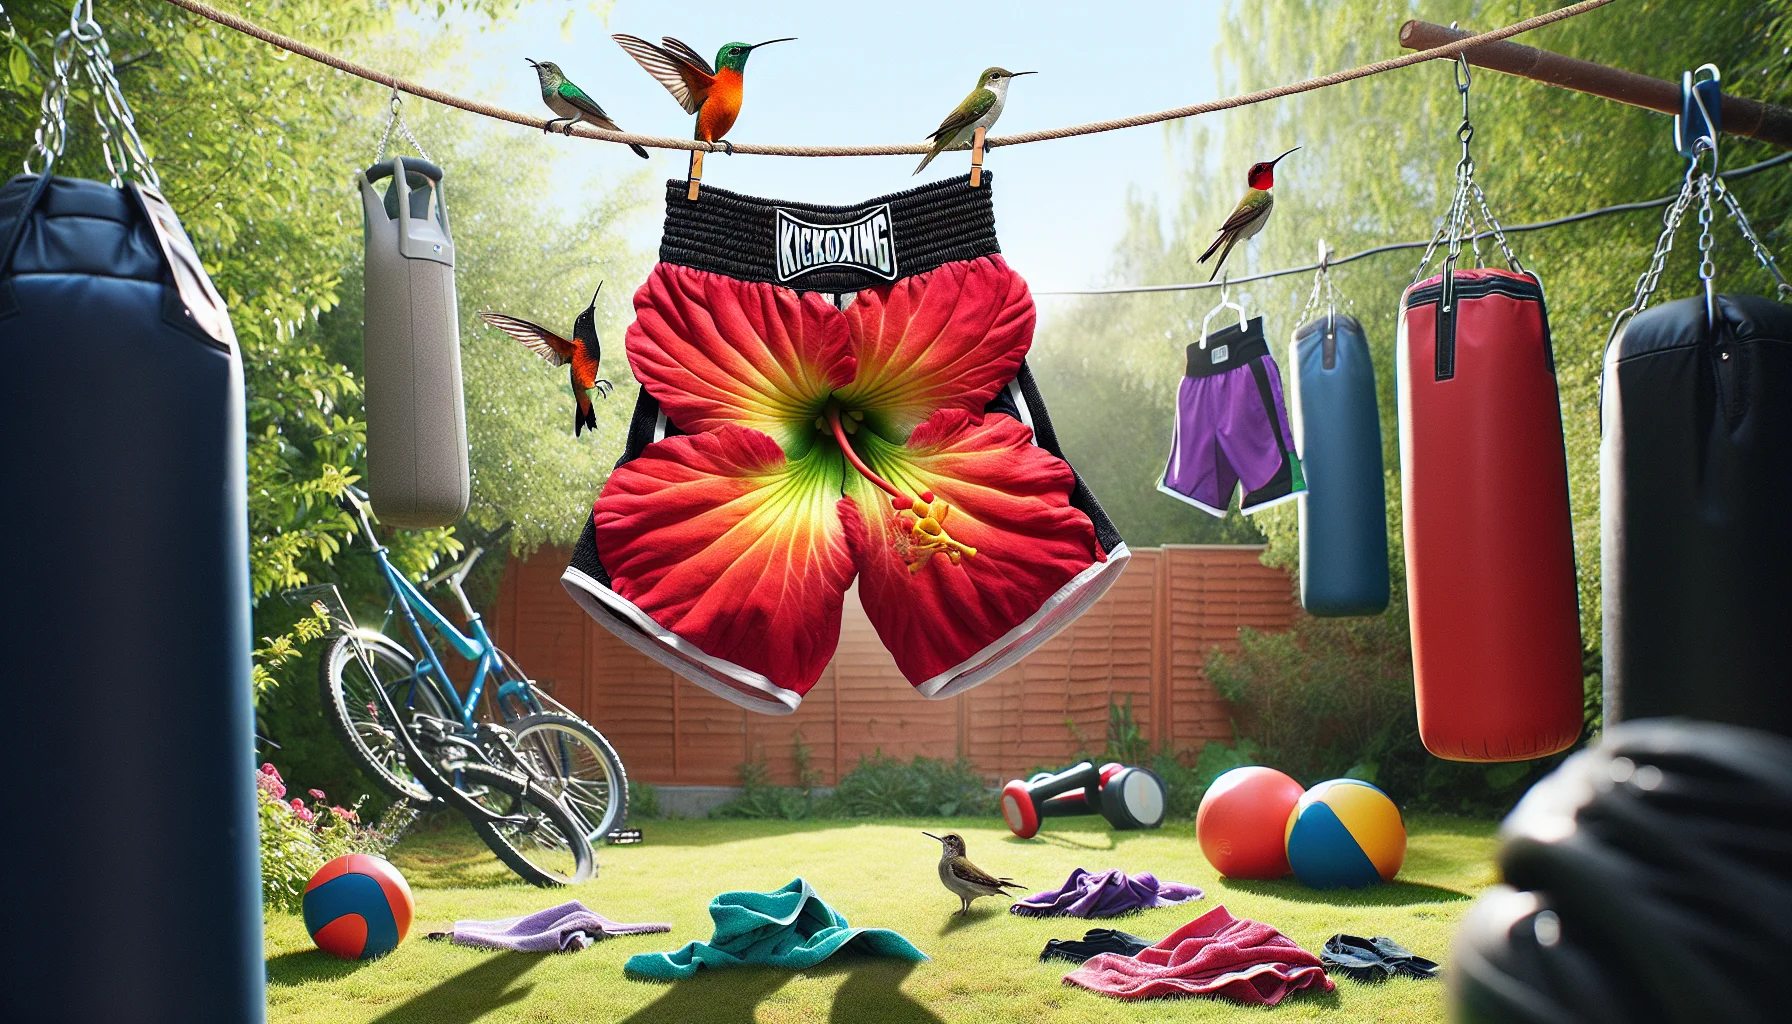 Create a comical and light-hearted scenario featuring kickboxing shorts. Picture this: a pair of vibrant, oversized kickboxing shorts hanging on a clothesline in a sunny backyard. Birds are playfully pecking at the shorts, misinterpreting them as a large, exotic flower due to their bright colors. Nearby, a hummingbird is seen attempting to drink nectar from the shorts. In the background, an array of fitness equipment is scattered haphazardly, suggesting a workout session interrupted by this amusing situation. This scene is intended to evoke a sense of humor and motivate people to incorporate fun into their exercise routines.